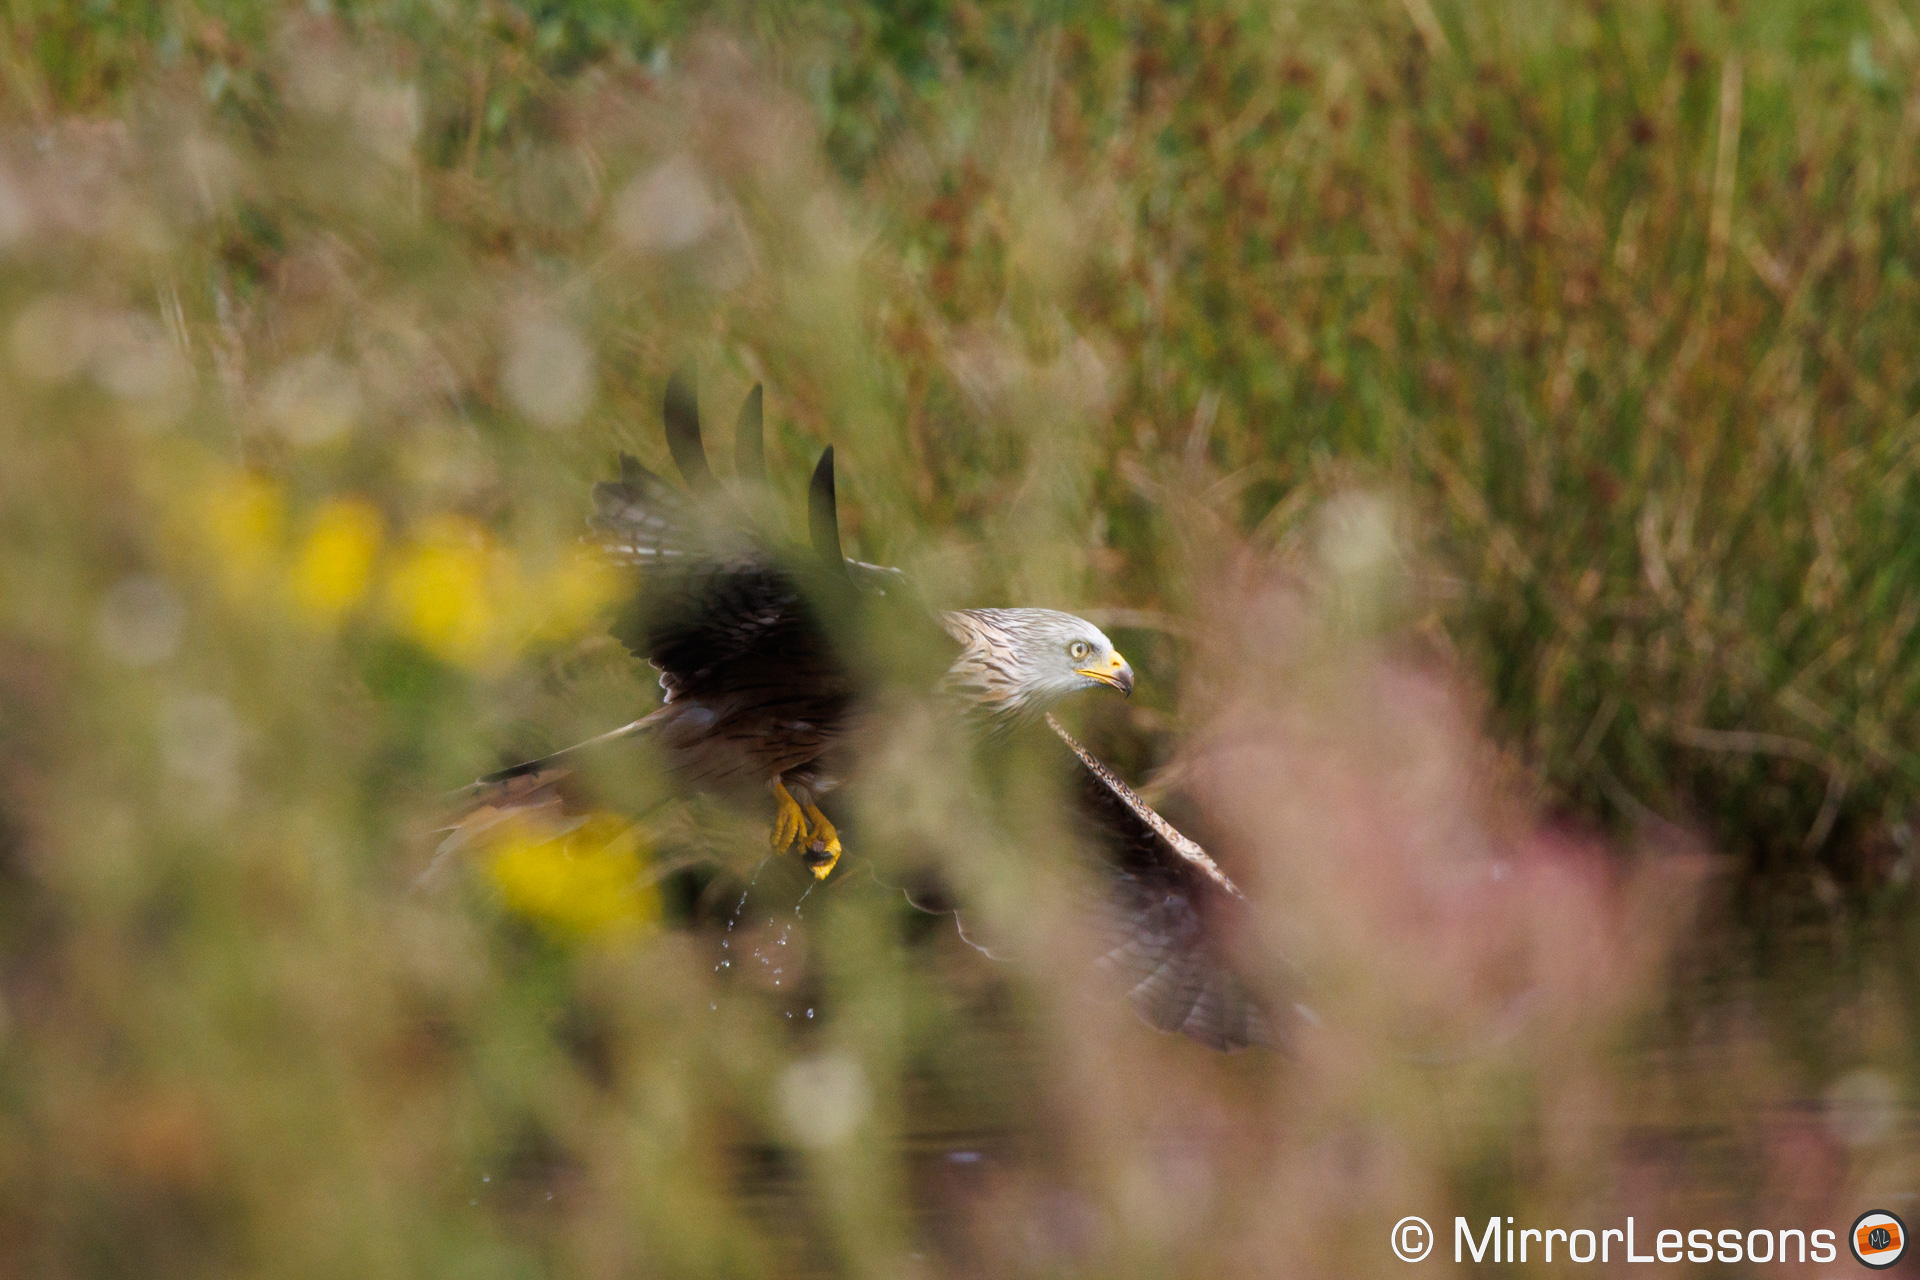 Red kite in focus, flying behind tall plants